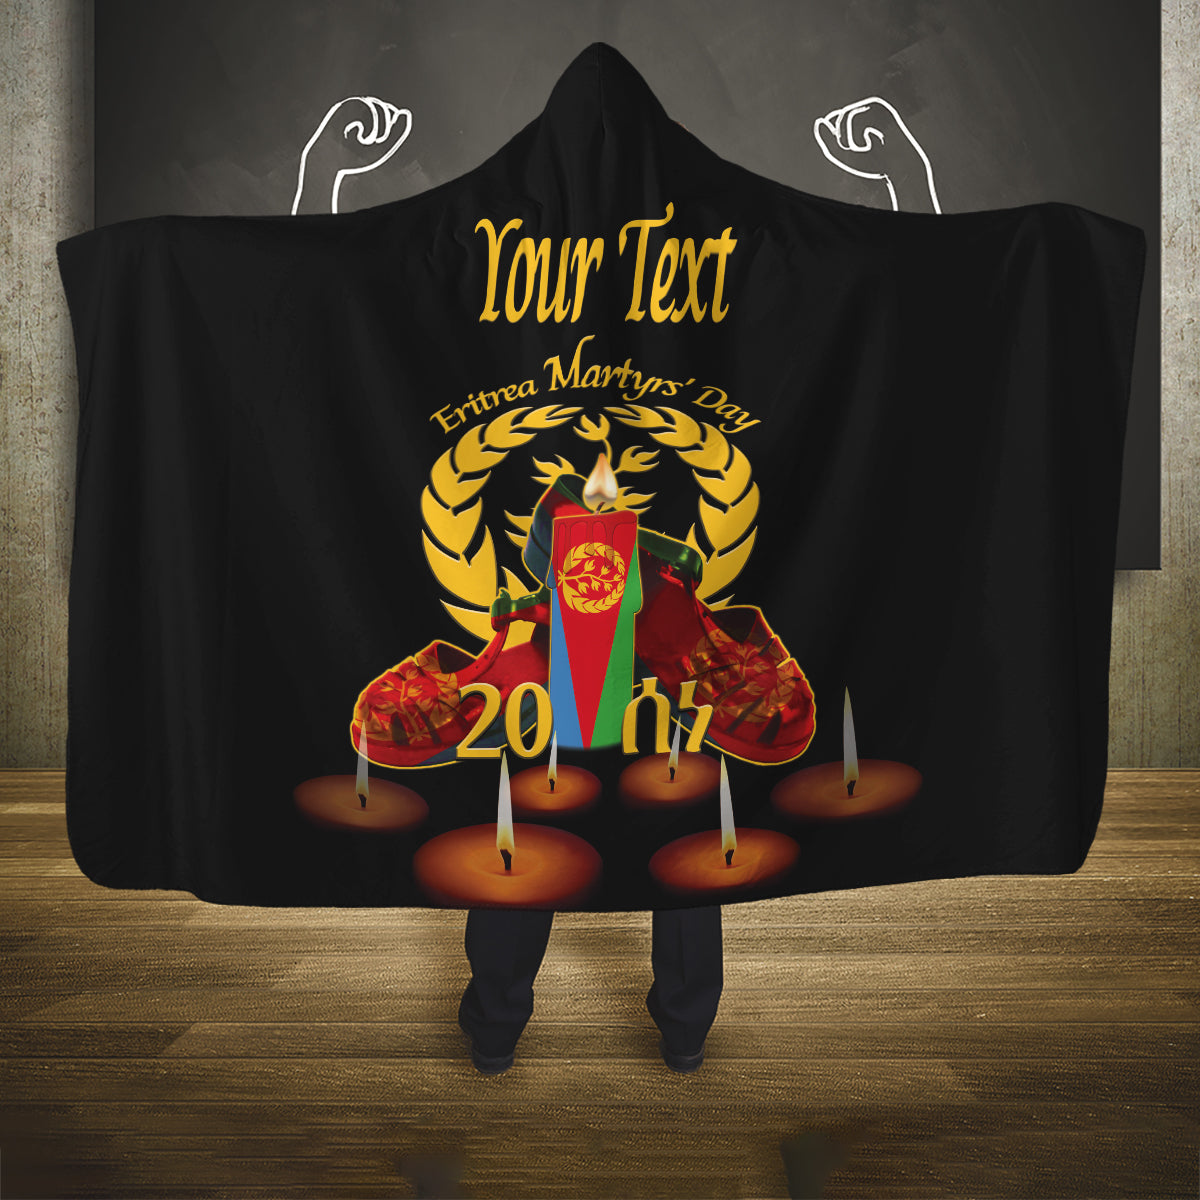 Custom Eritrea Martyrs' Day Hooded Blanket 20 June Shida Shoes With Candles - Black